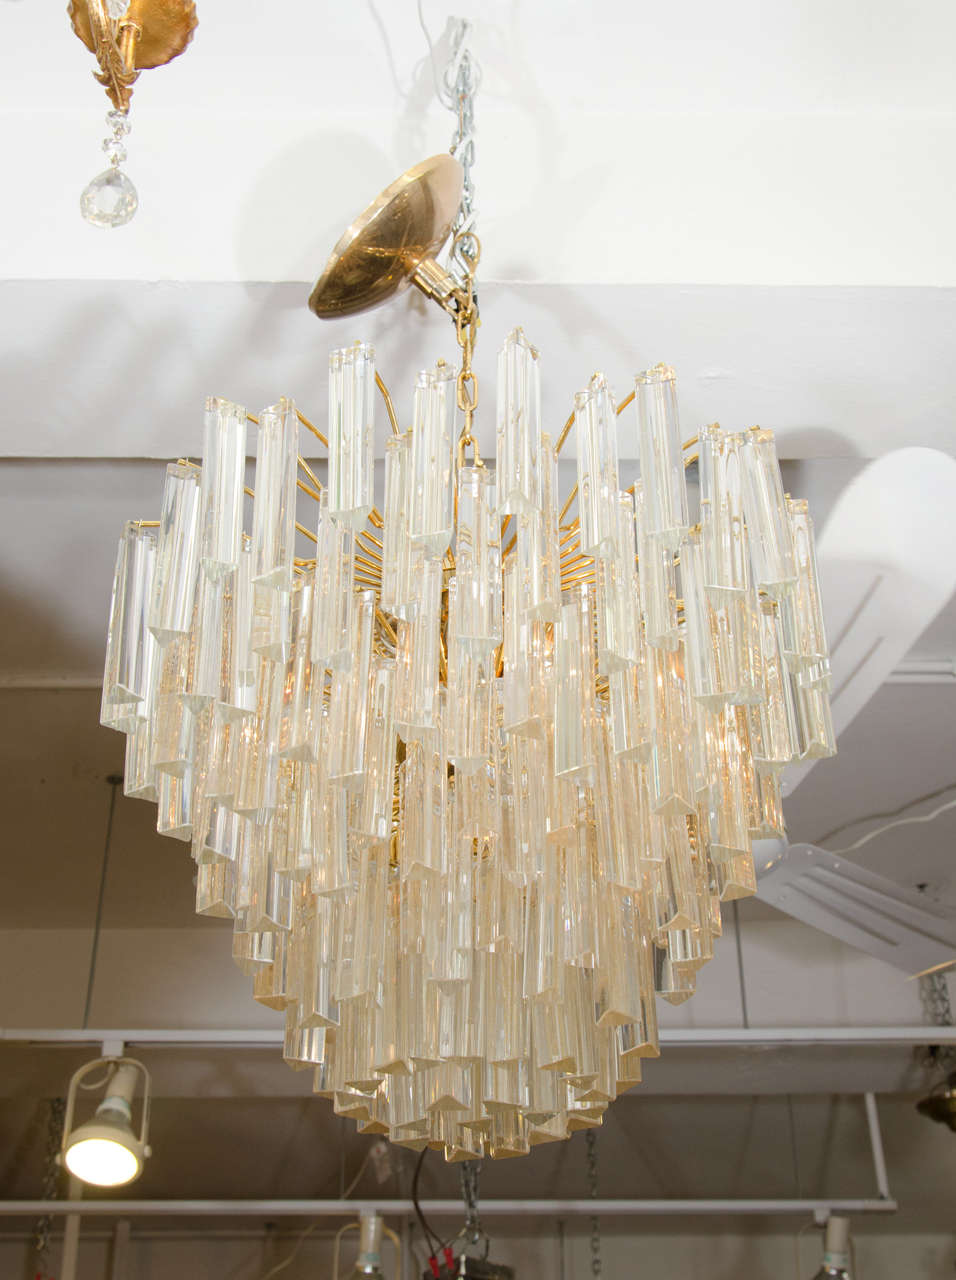 Rare Size Venini Murano gold dust glass pendant chandelier, Very Fine Quality and Radiating Frame and Original Fine Gold Plated Canopy,The Fixture is fitted for six standard base chandelier bulbs.

Matching sconces are available for purchase